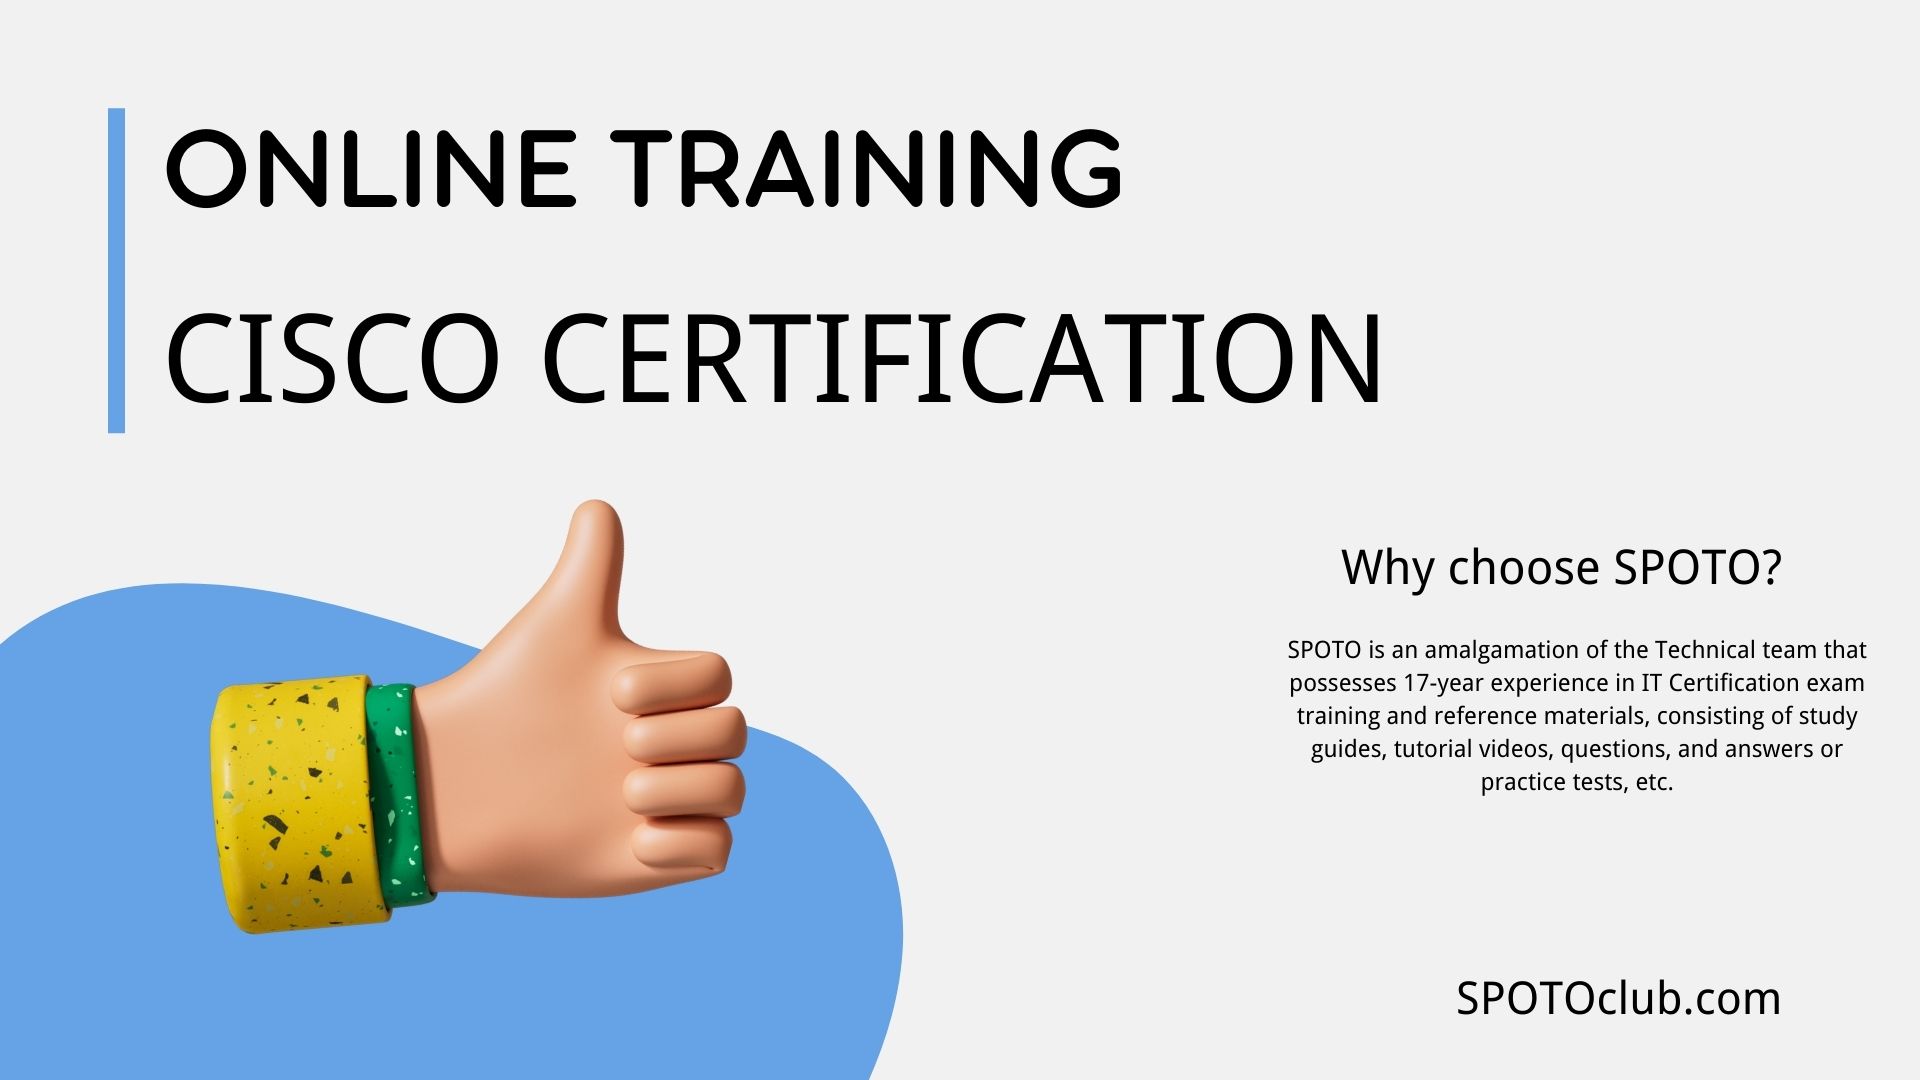 Guide to Preparing for Cisco Certifications